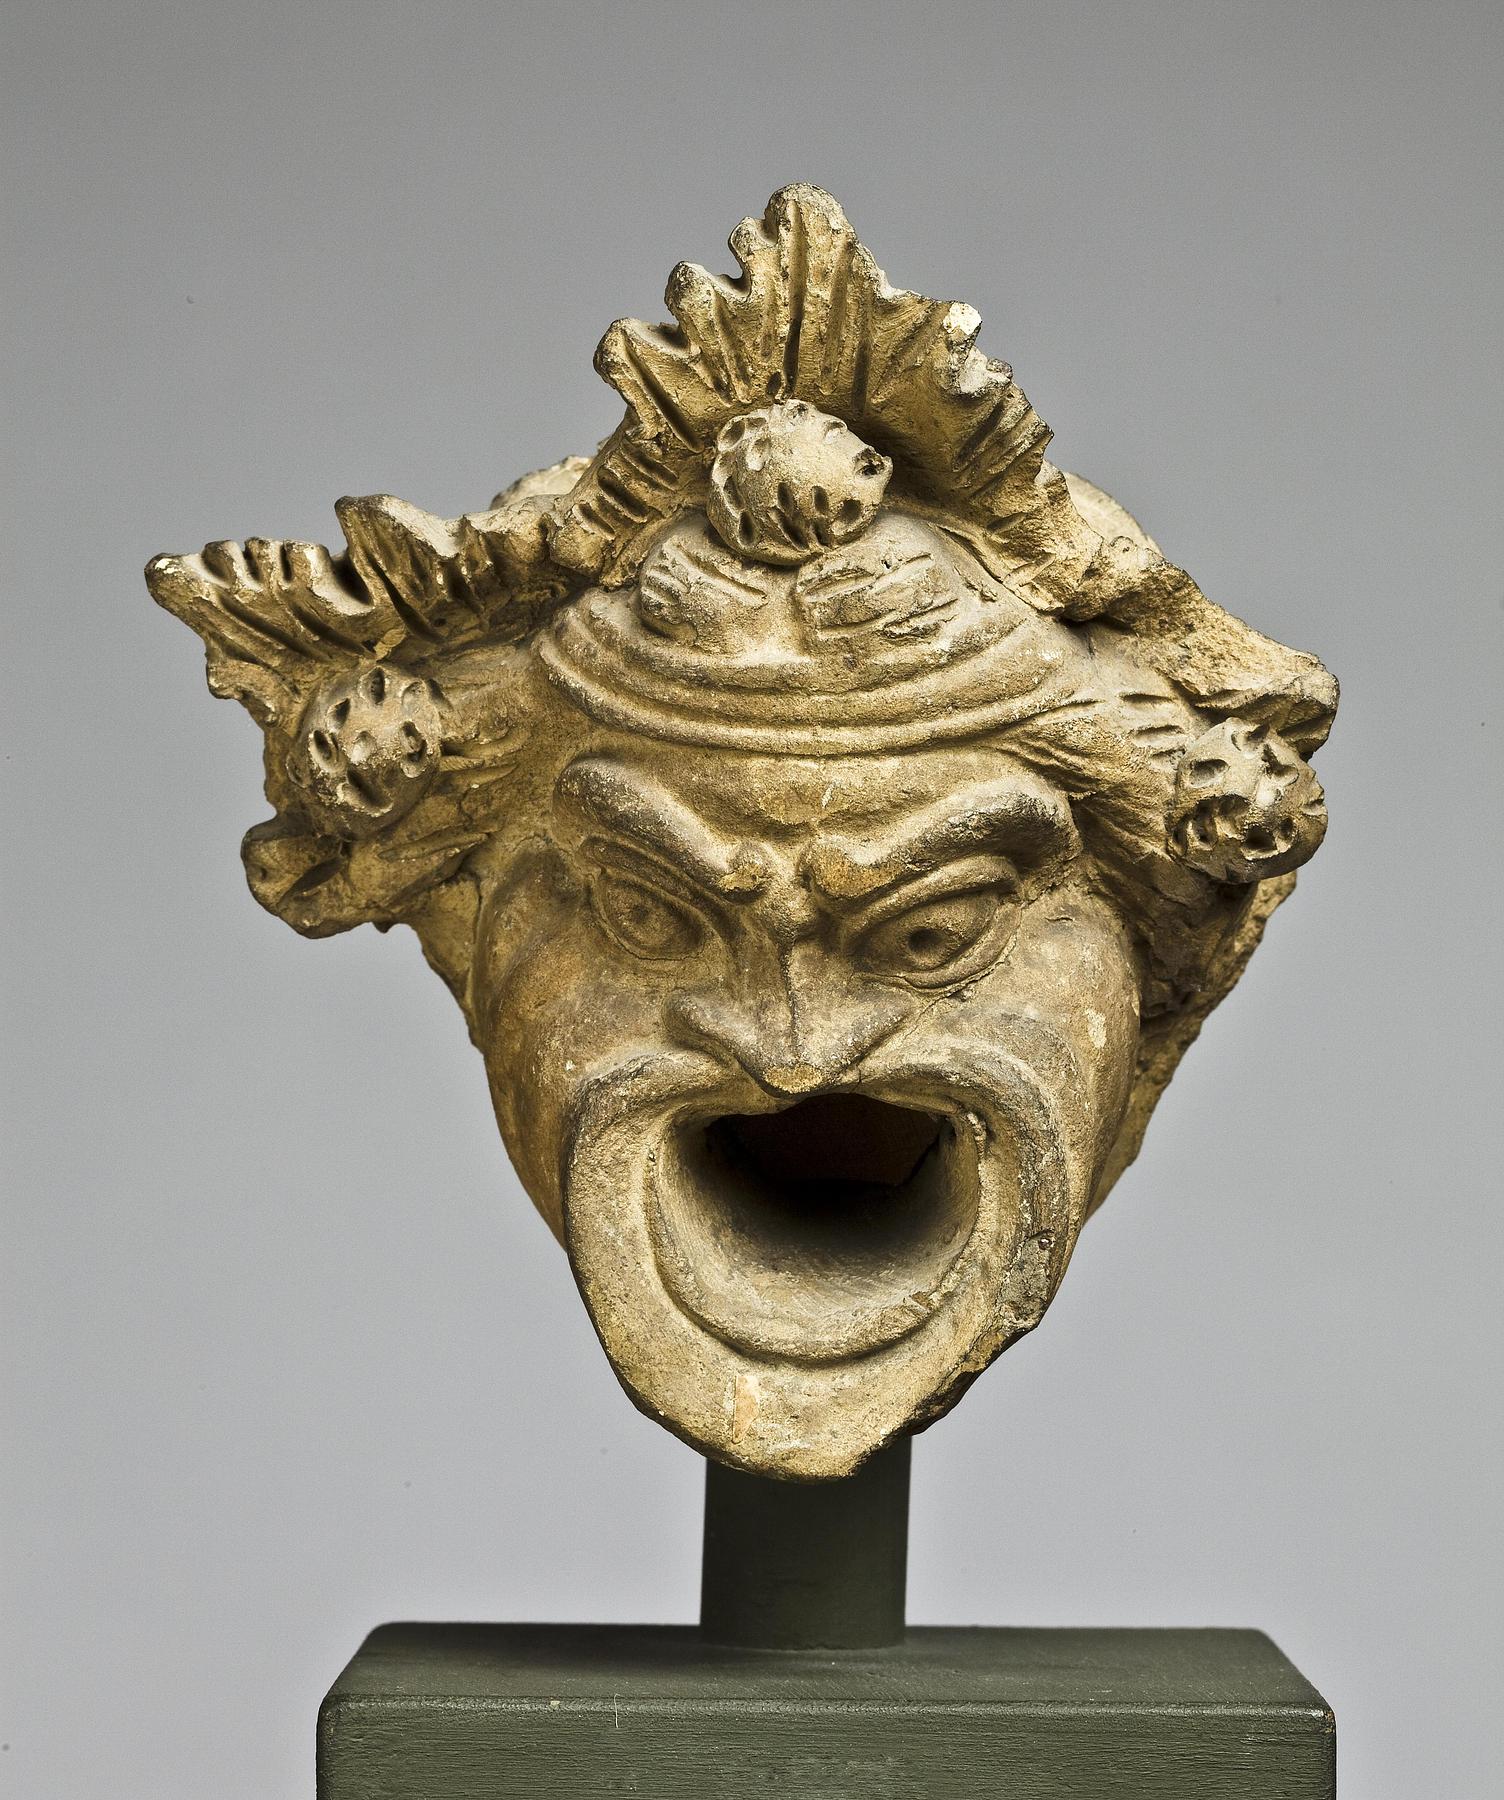 Water spout in the shape of a theatre mask, H1053